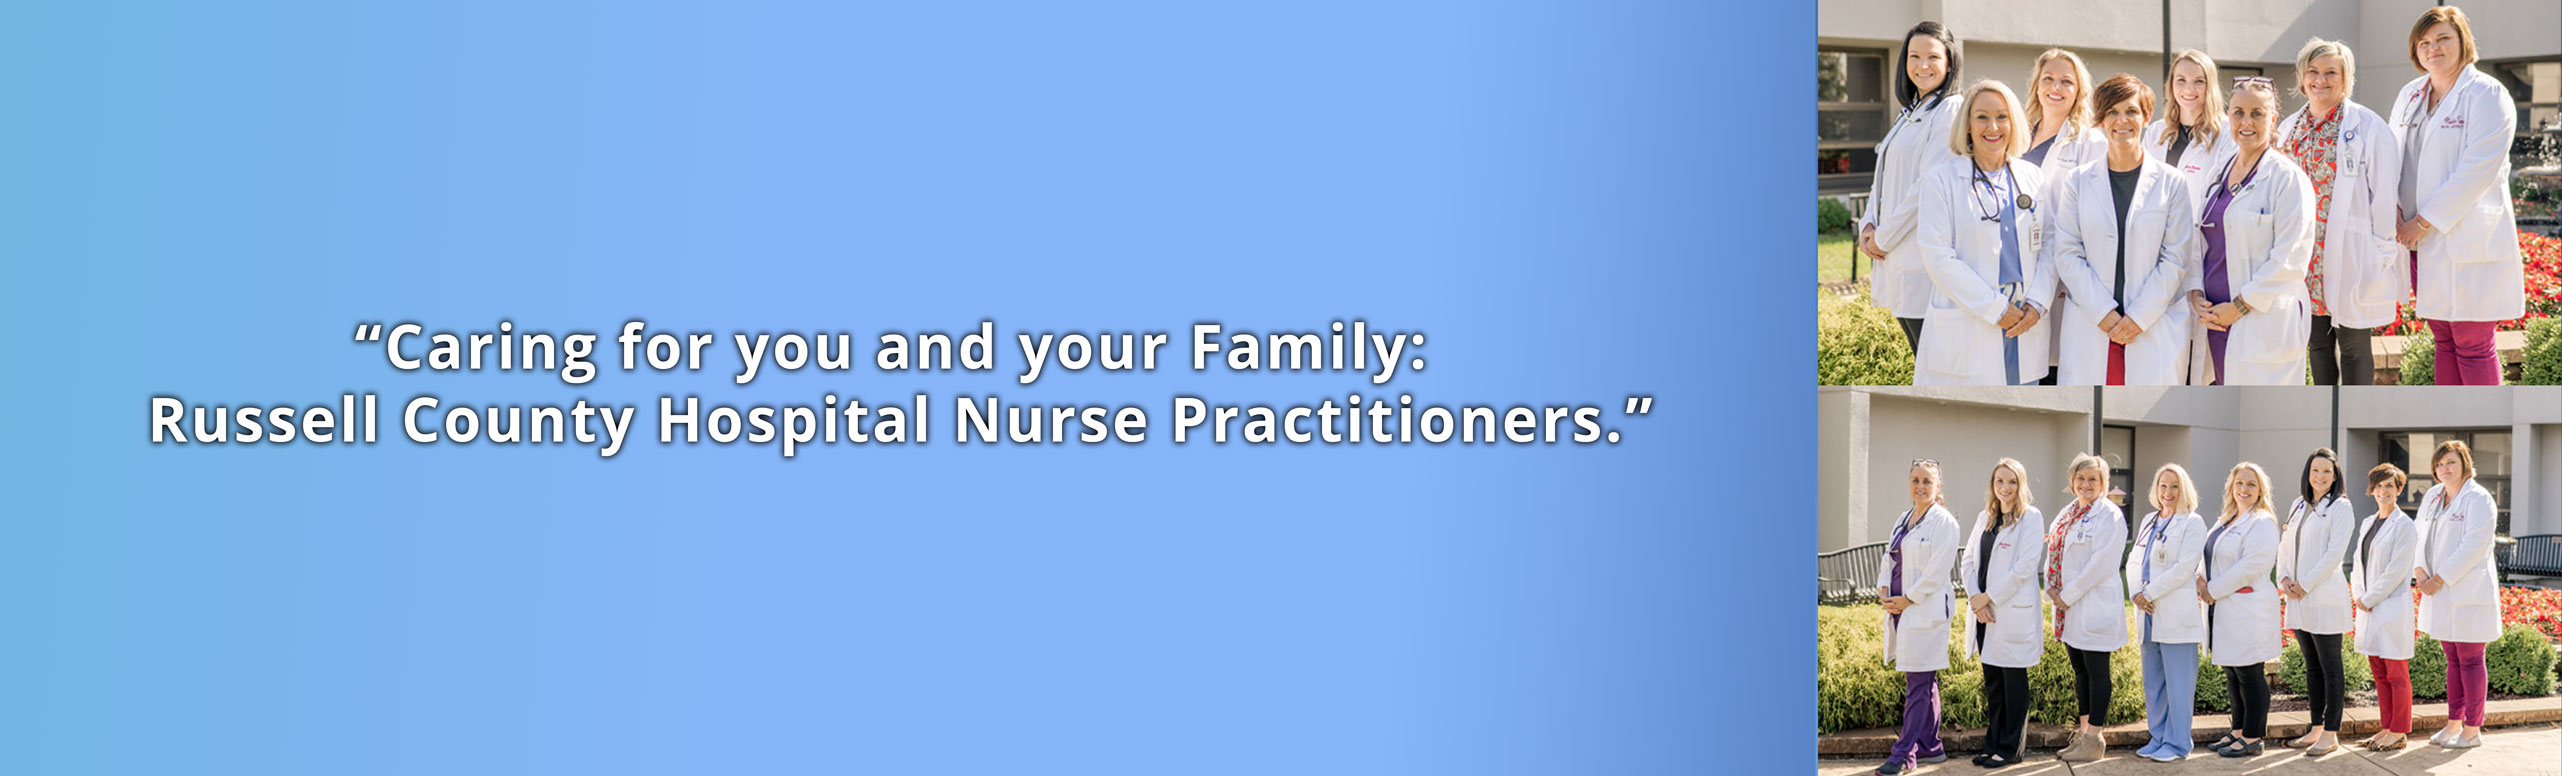 "Caring for you and your Family Russell County Hospital Nurse Practitioners"